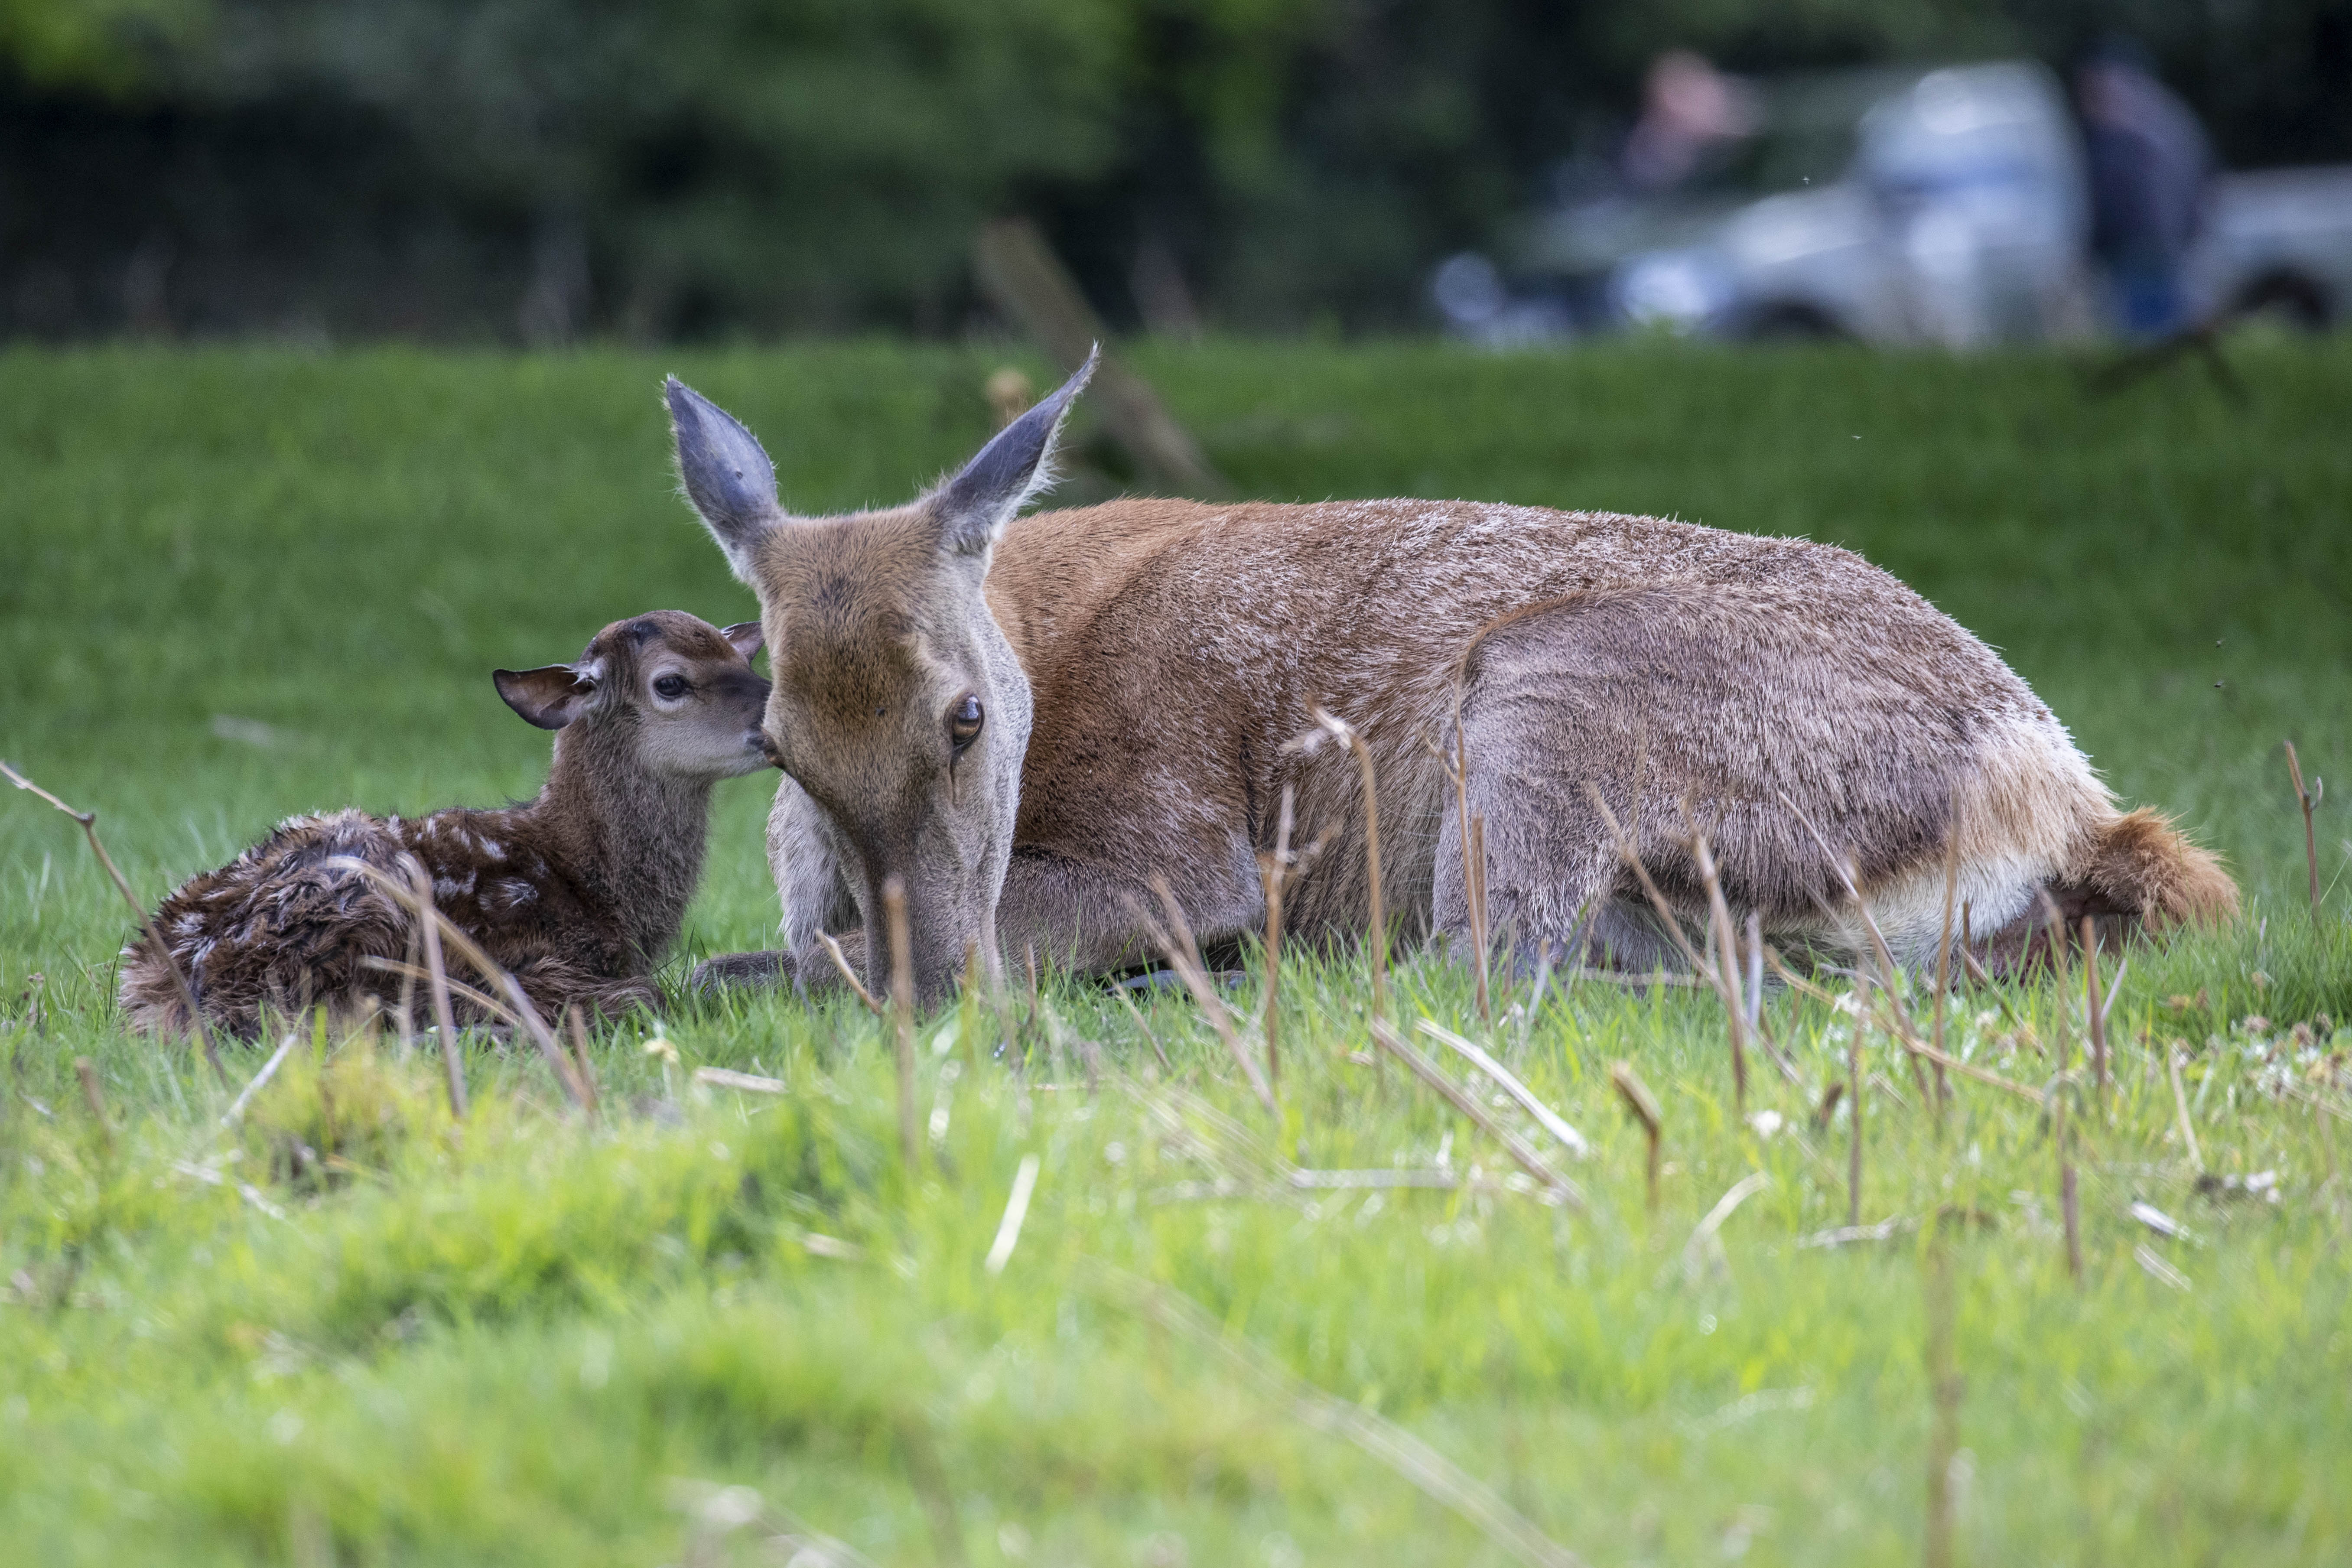 A hind with its young. Credit: Cathy Cooper 